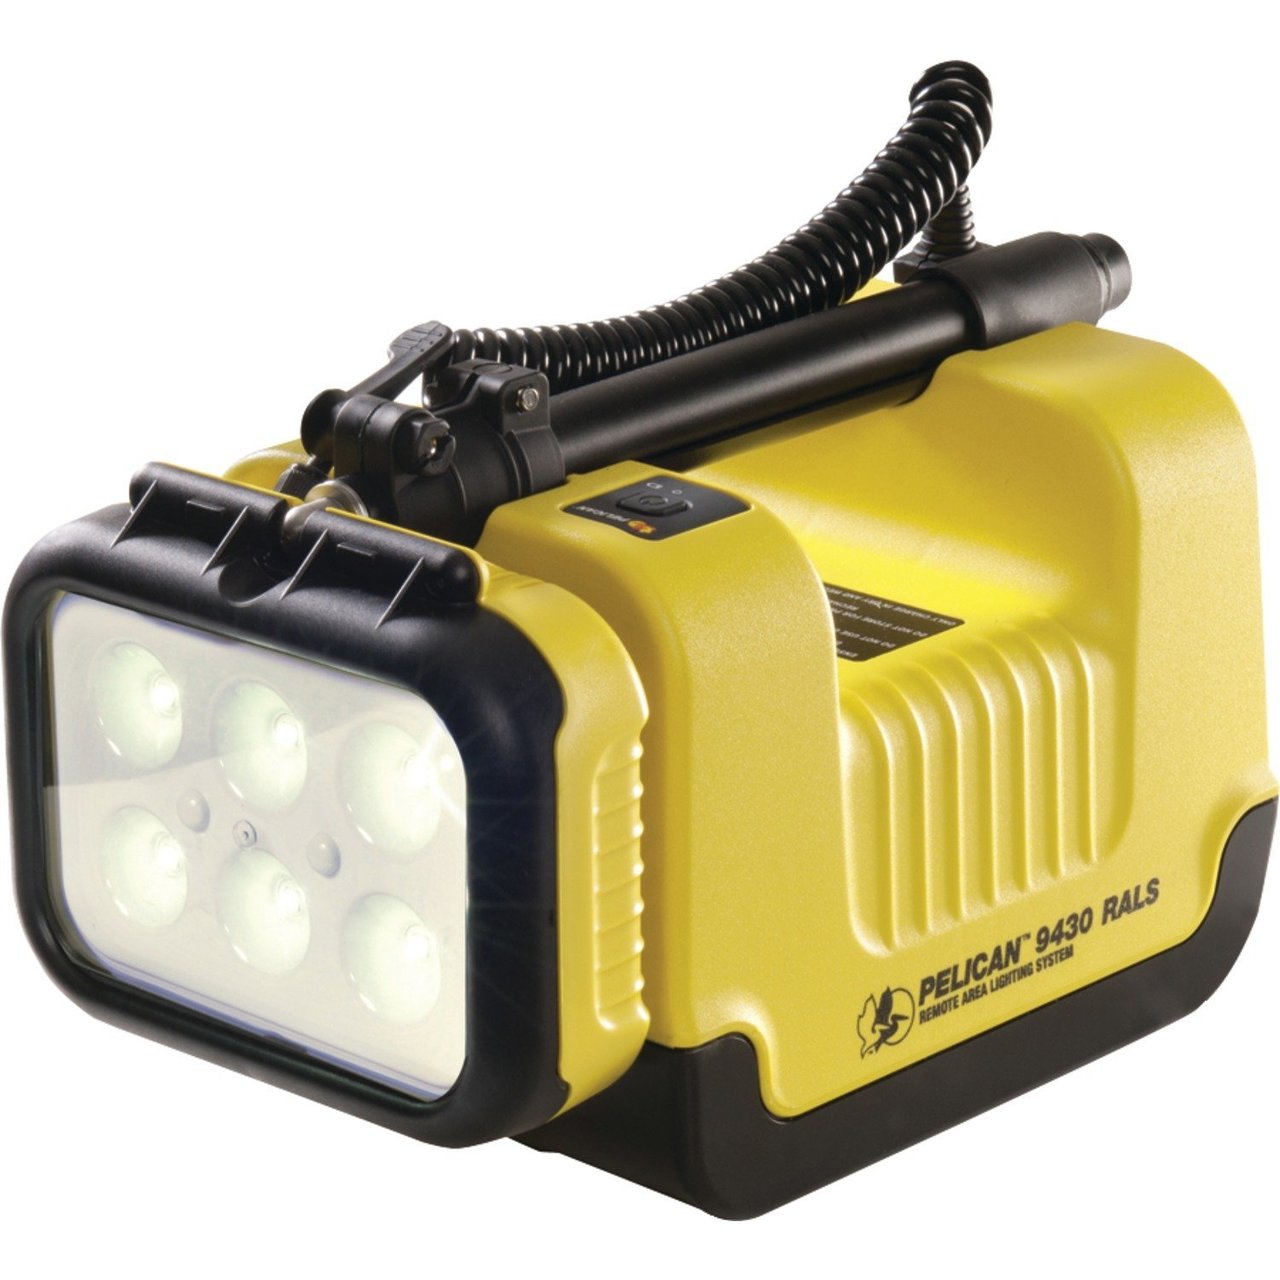 Pelican 9430 Remote Area Lighting System, Yellow